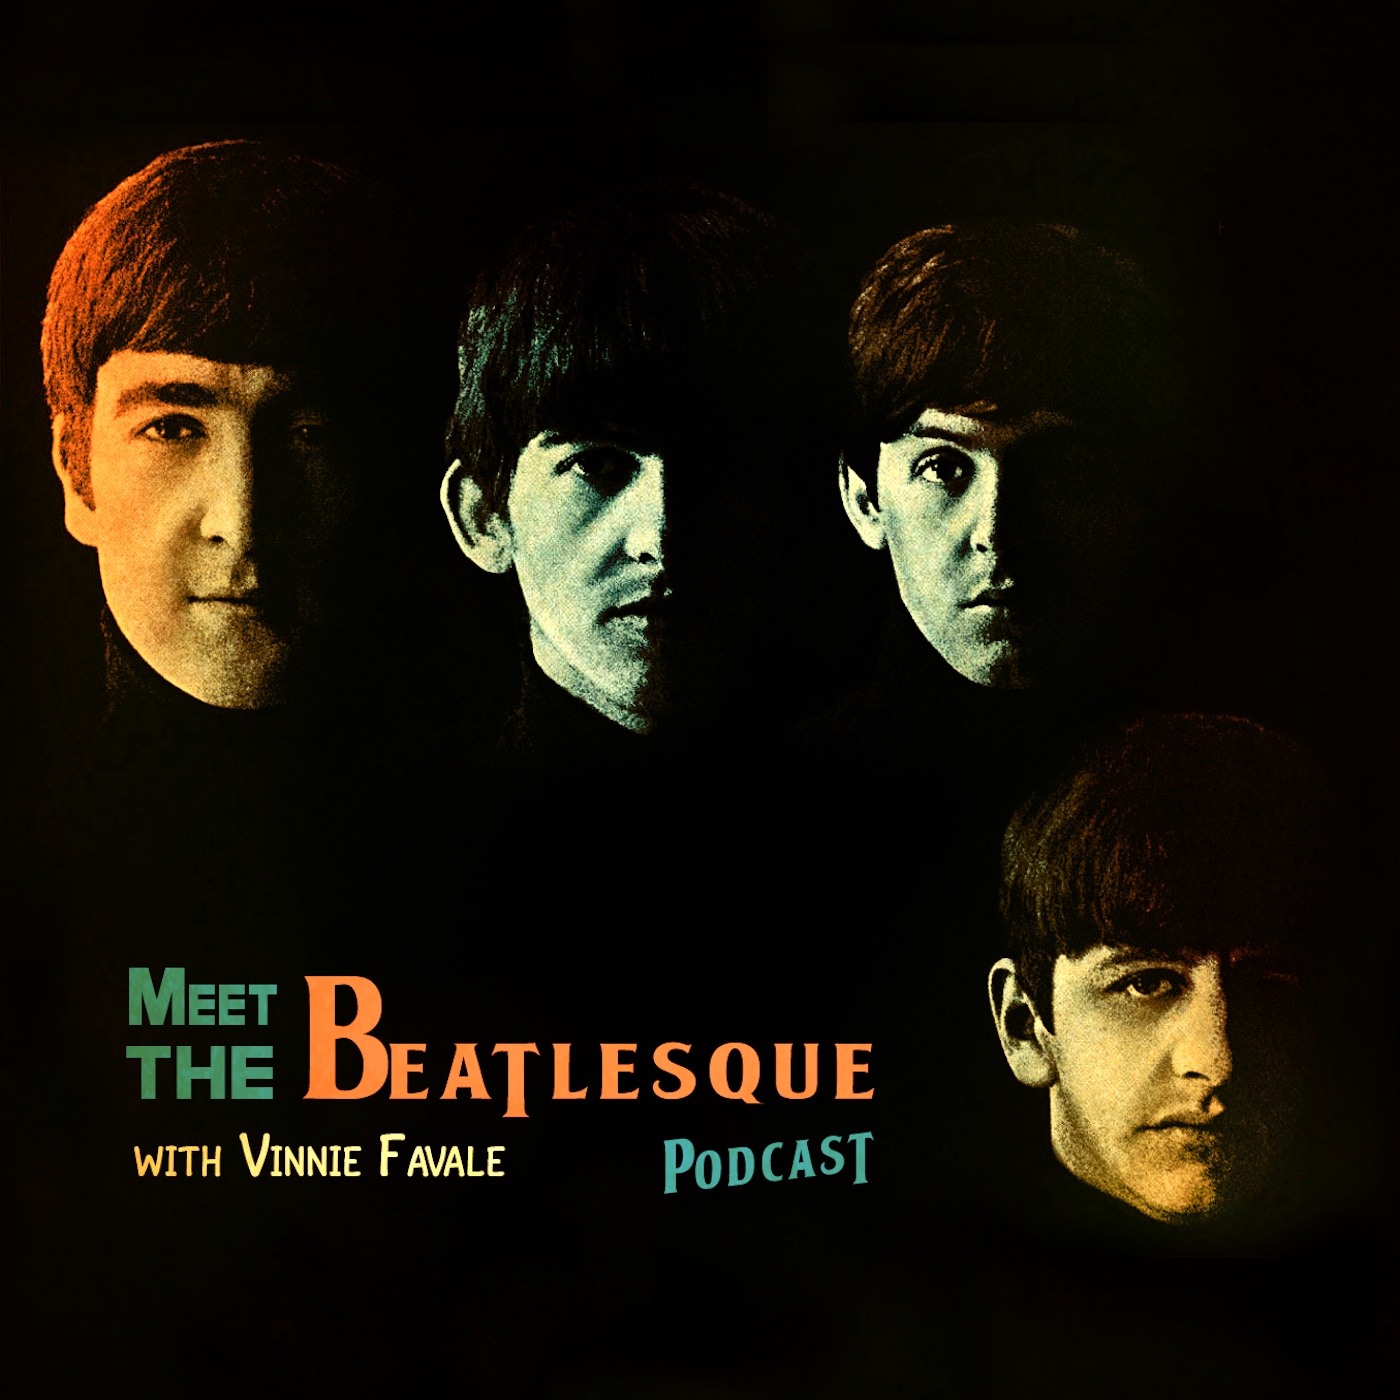 Meet The Beatlesque with Vinnie Favale - Show #2